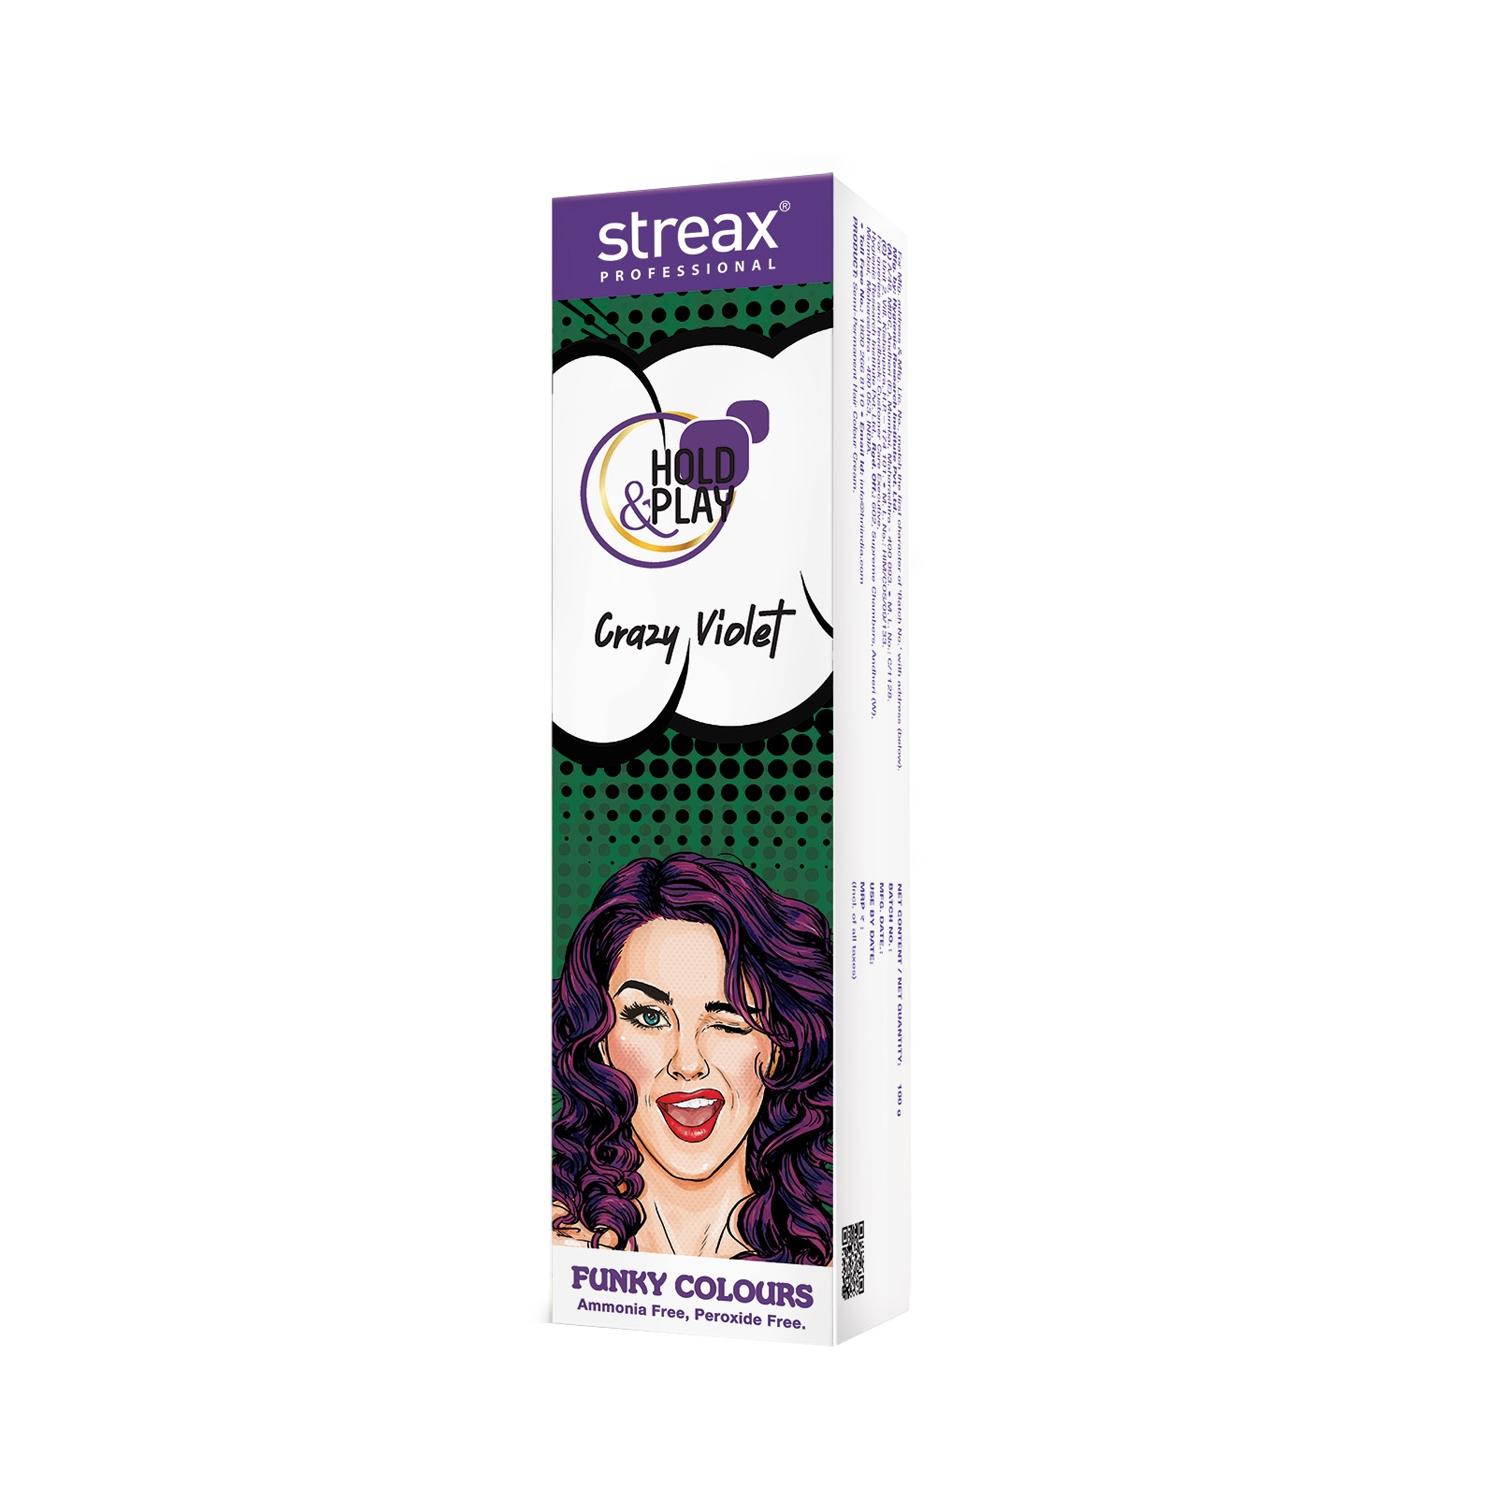 streax professional hold & play funky hair color - crazy violet (100g)